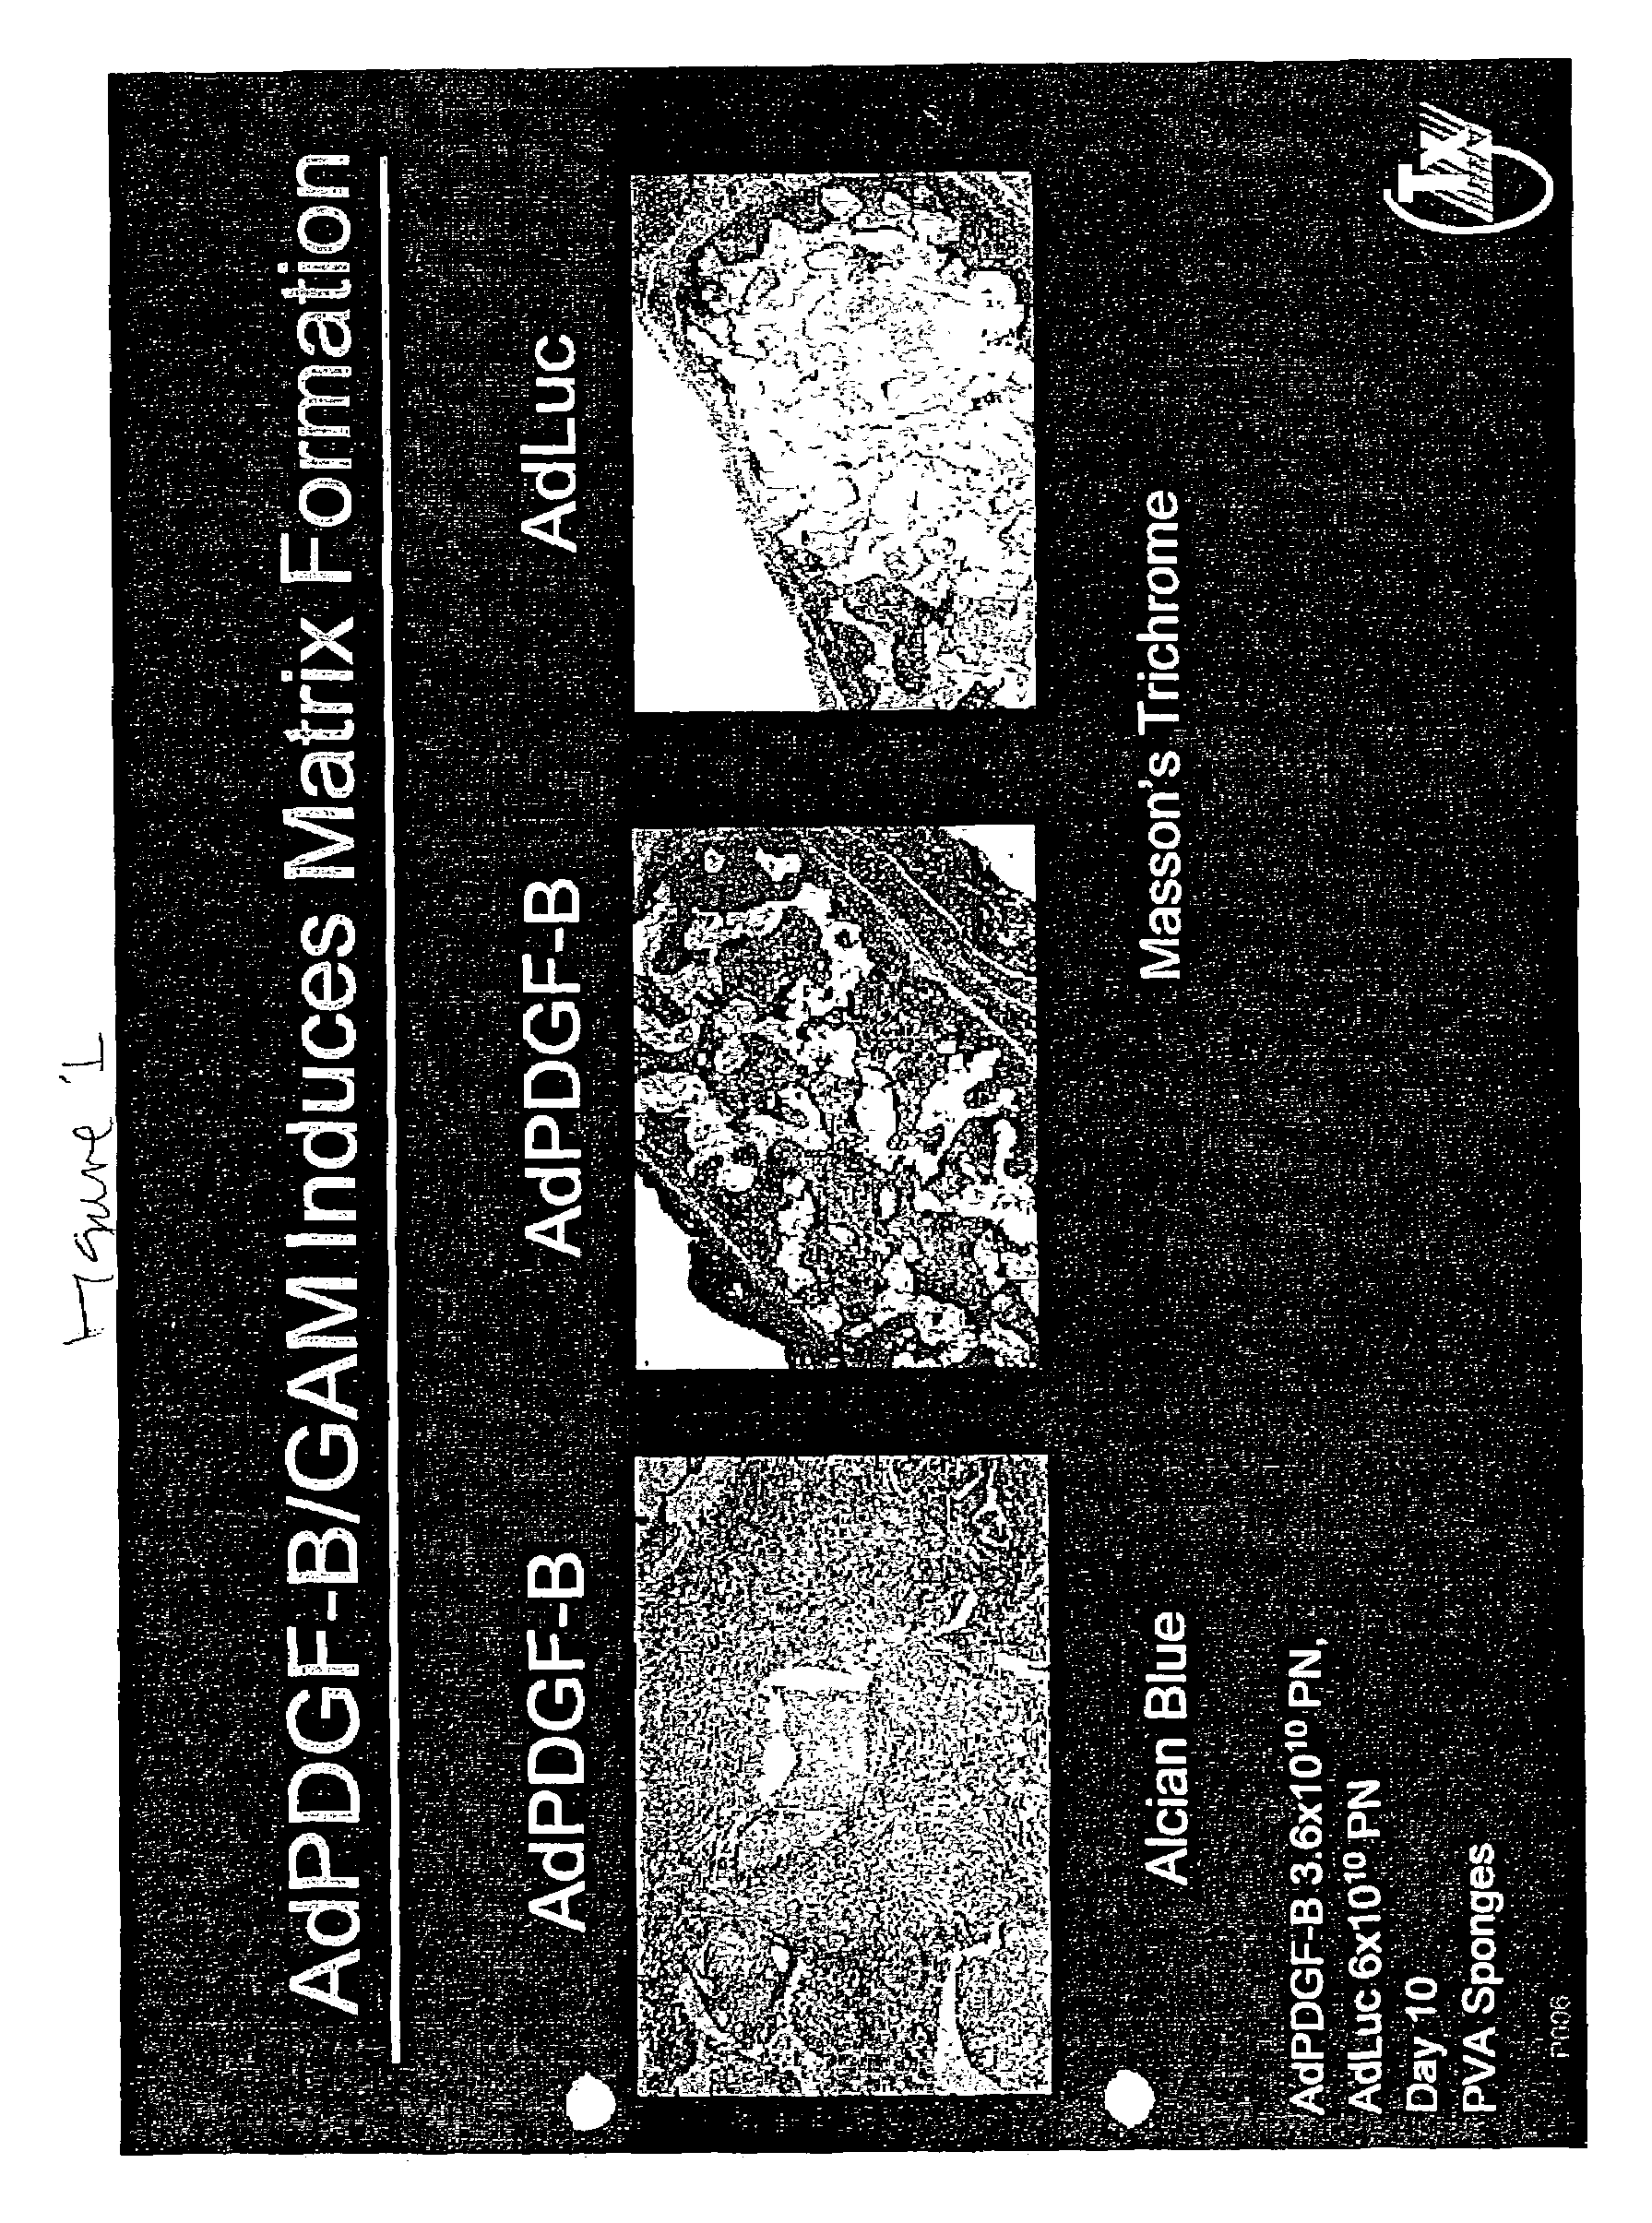 Traversal of nucleic acid molecules through a fluid space and expression in repair cells